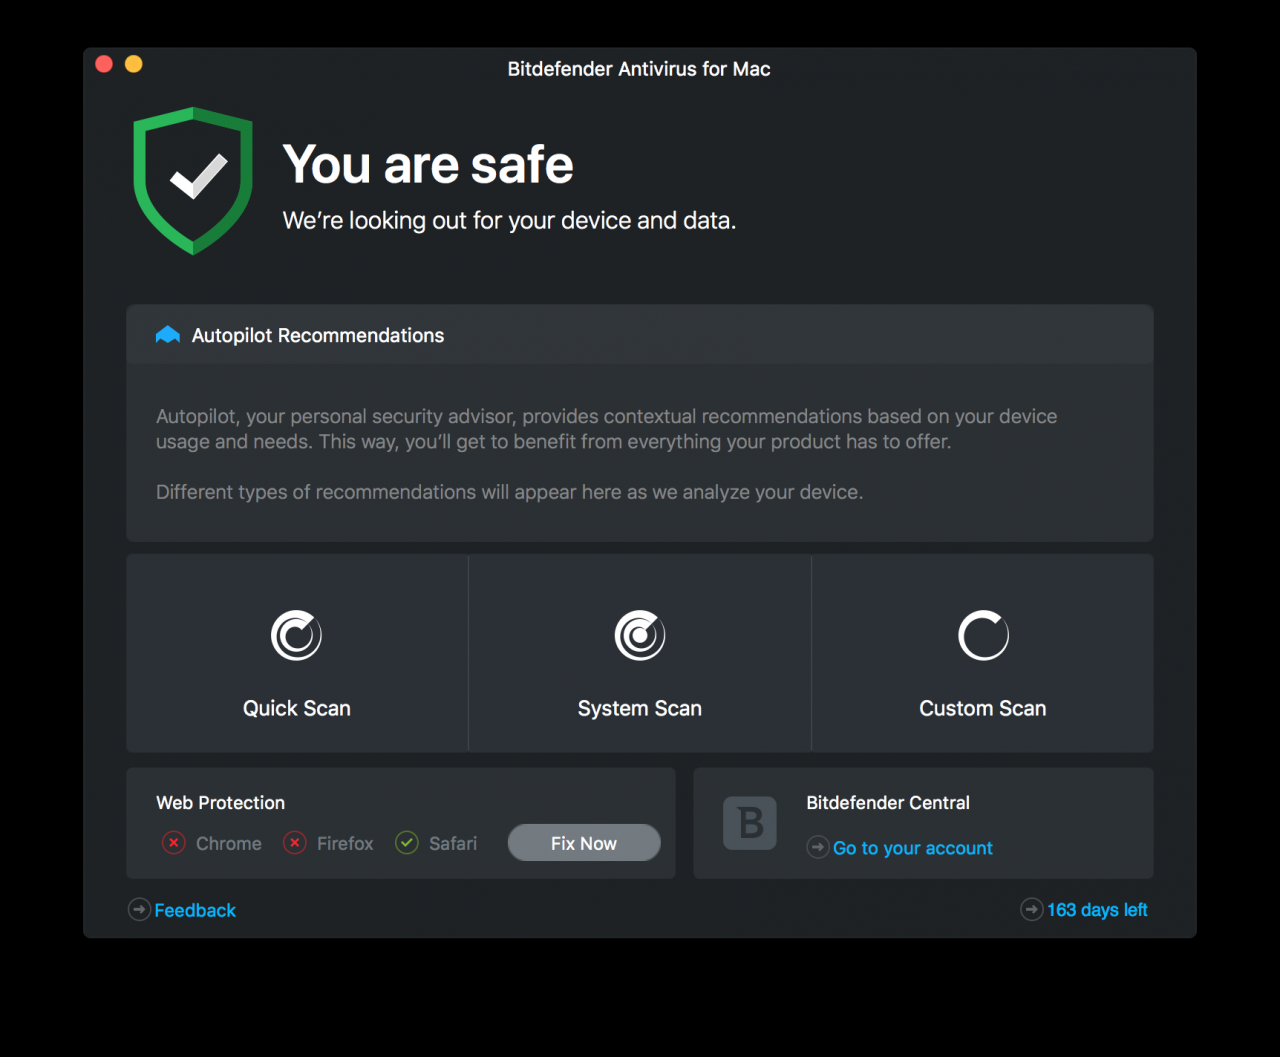 Bitdefender Family Pack 2023 EU Key (2 Years / 15 Devices)